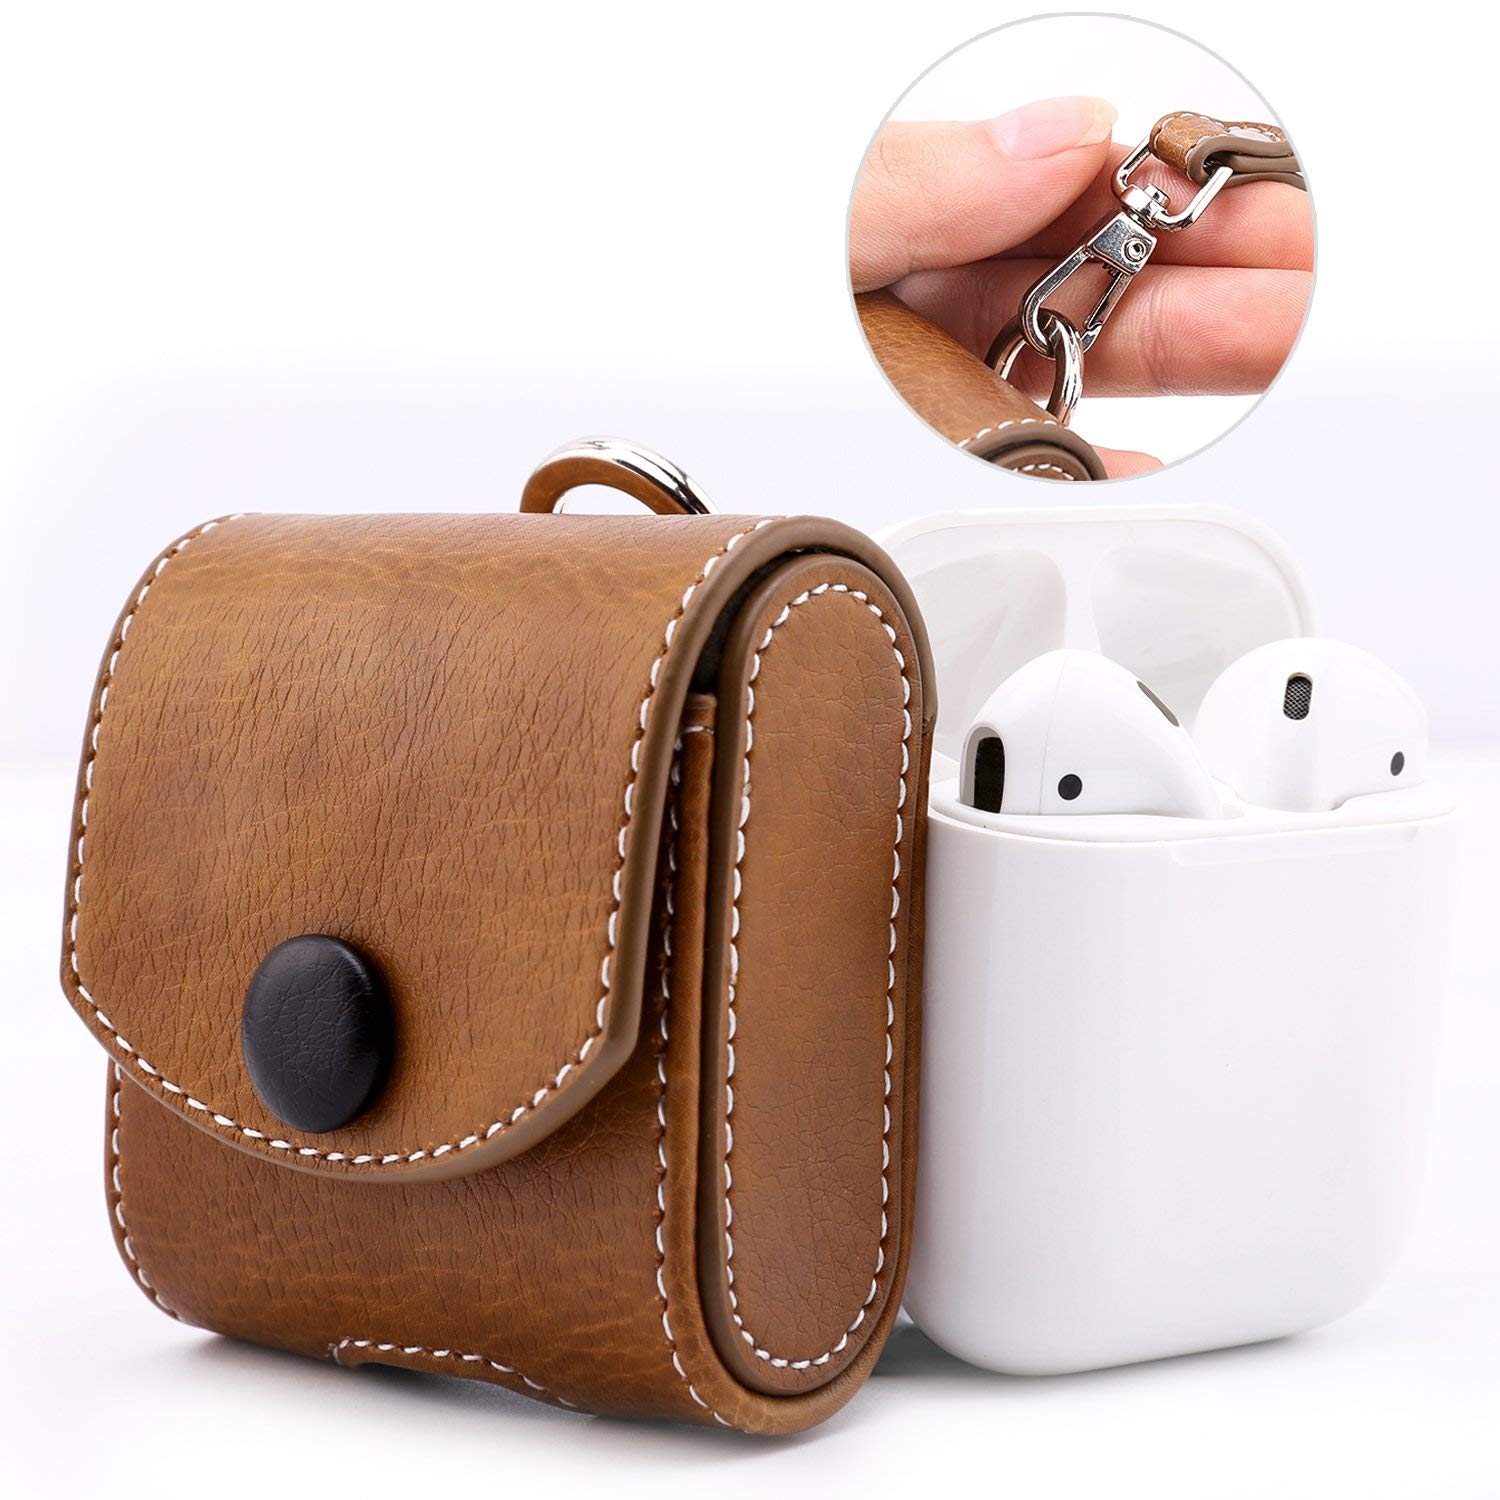 LiKGUS for Apple AirPods 1 & 2 Case Snap Closure Leather Protective Cover with Holding Strap (Brown)